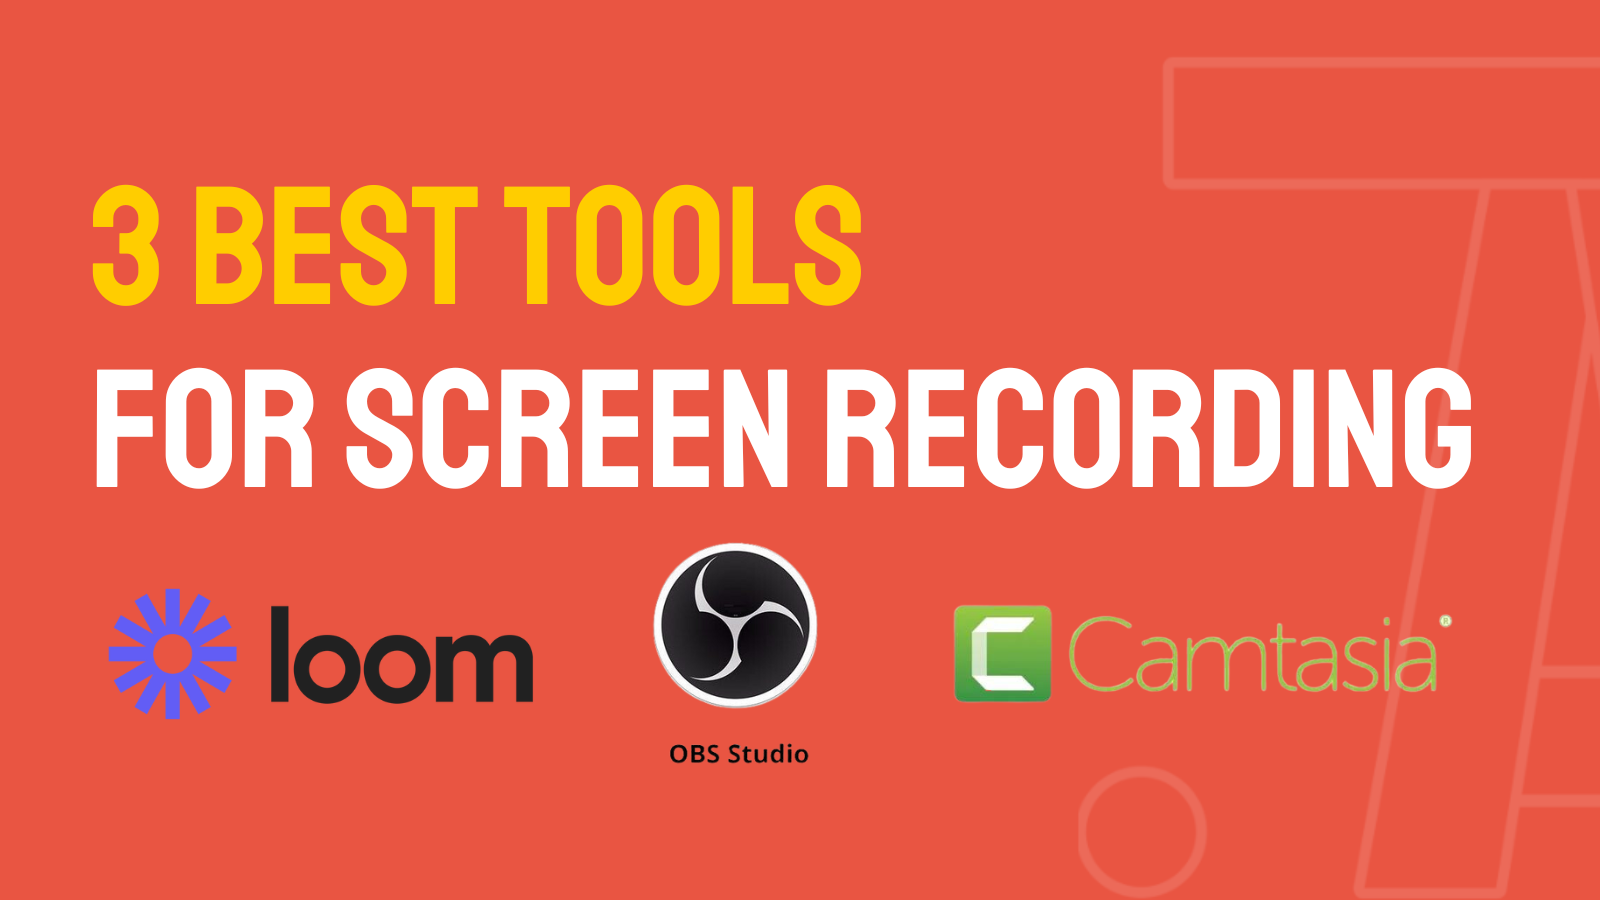 3 BEST tools for screen recording